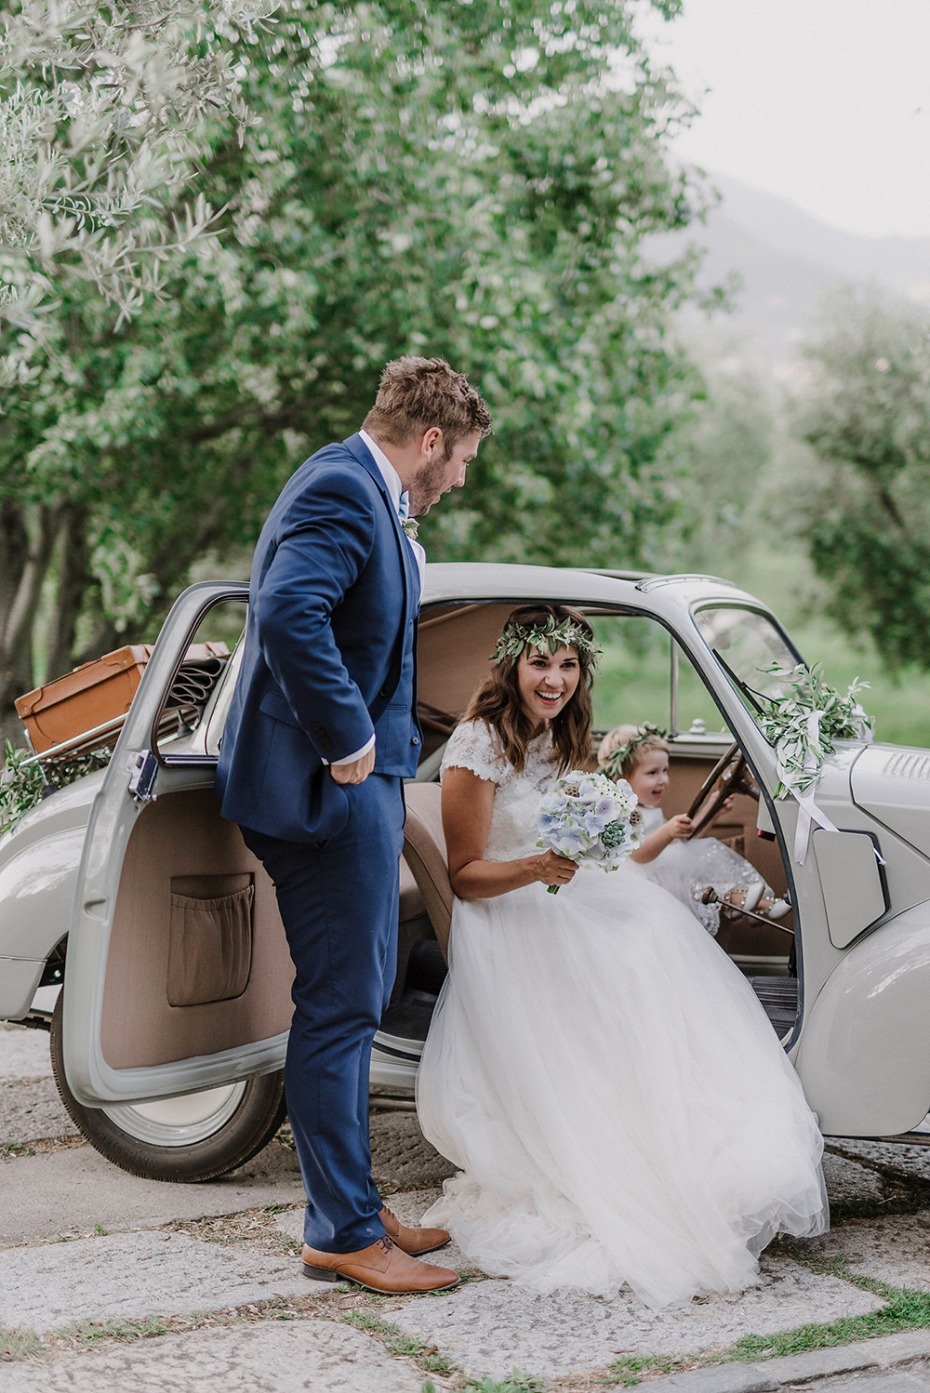 Arrive and Depart in Style with These Wedding Transportation Ideas